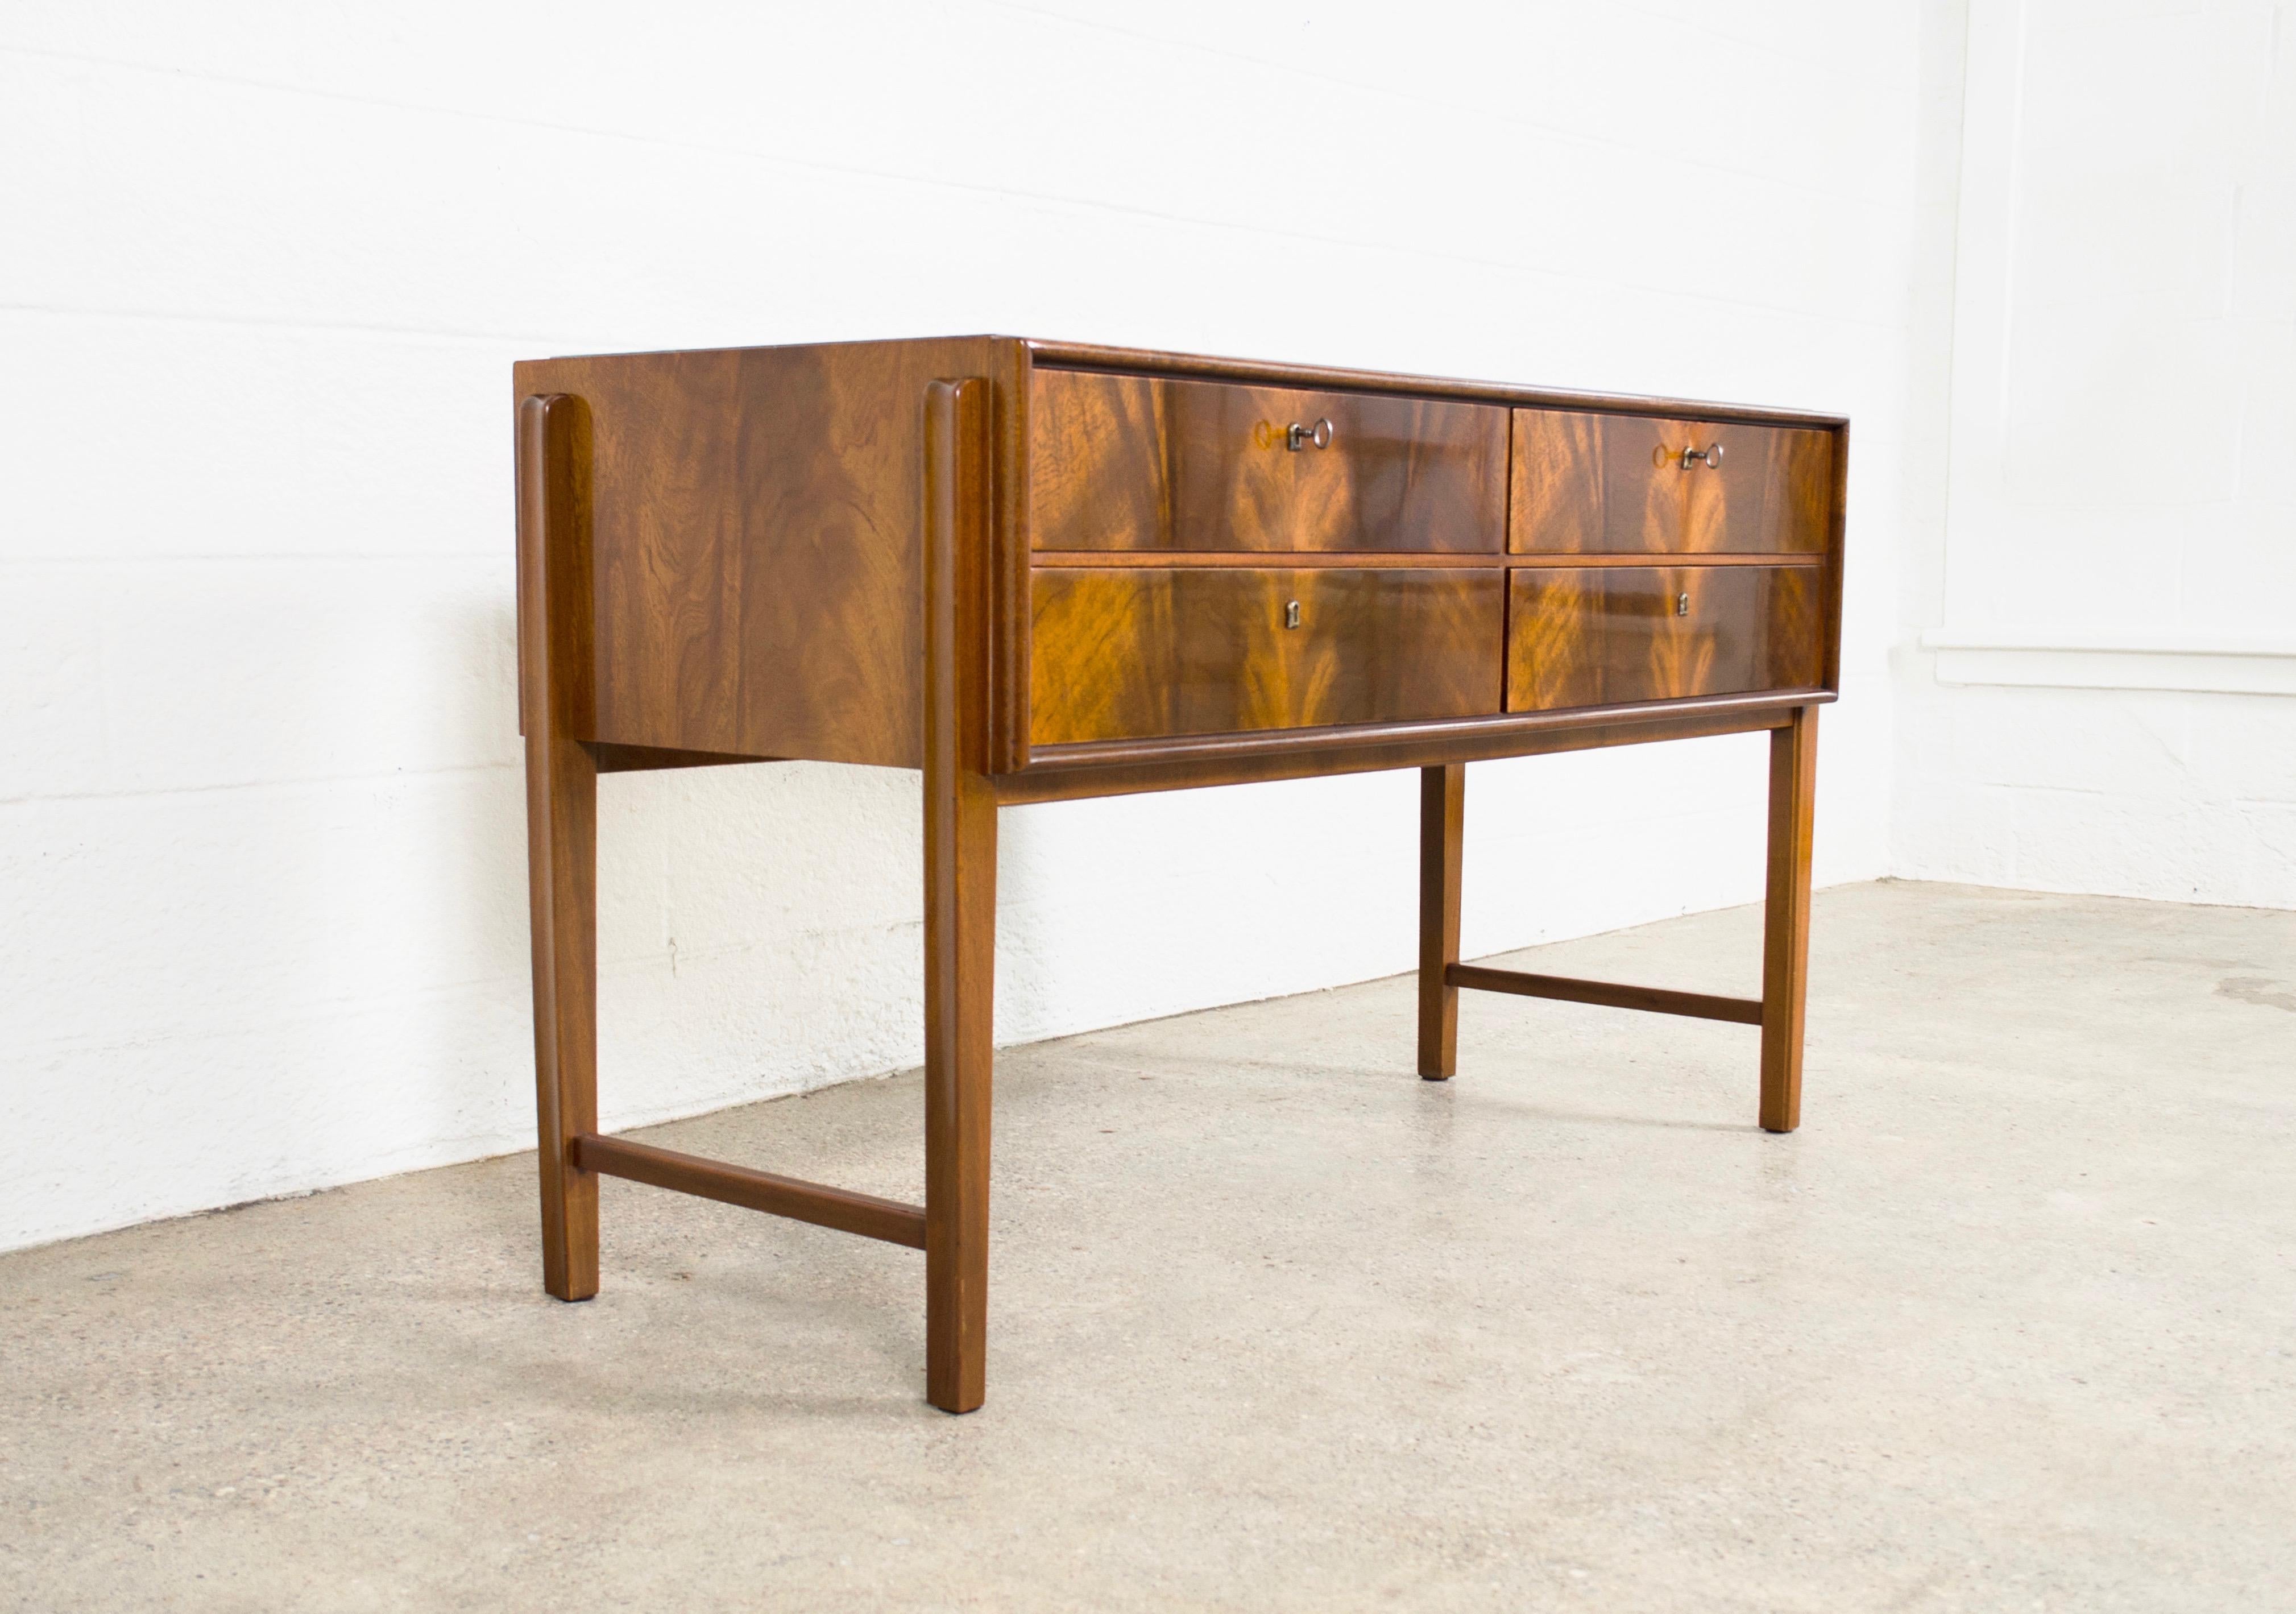 This exceptional vintage Mid-Century Modern sideboard buffet circa 1960 is impeccably crafted and features a lacquered burl wood surface with stunning grain pattern and a recessed glass tabletop. The four locking drawers have dovetailed construction